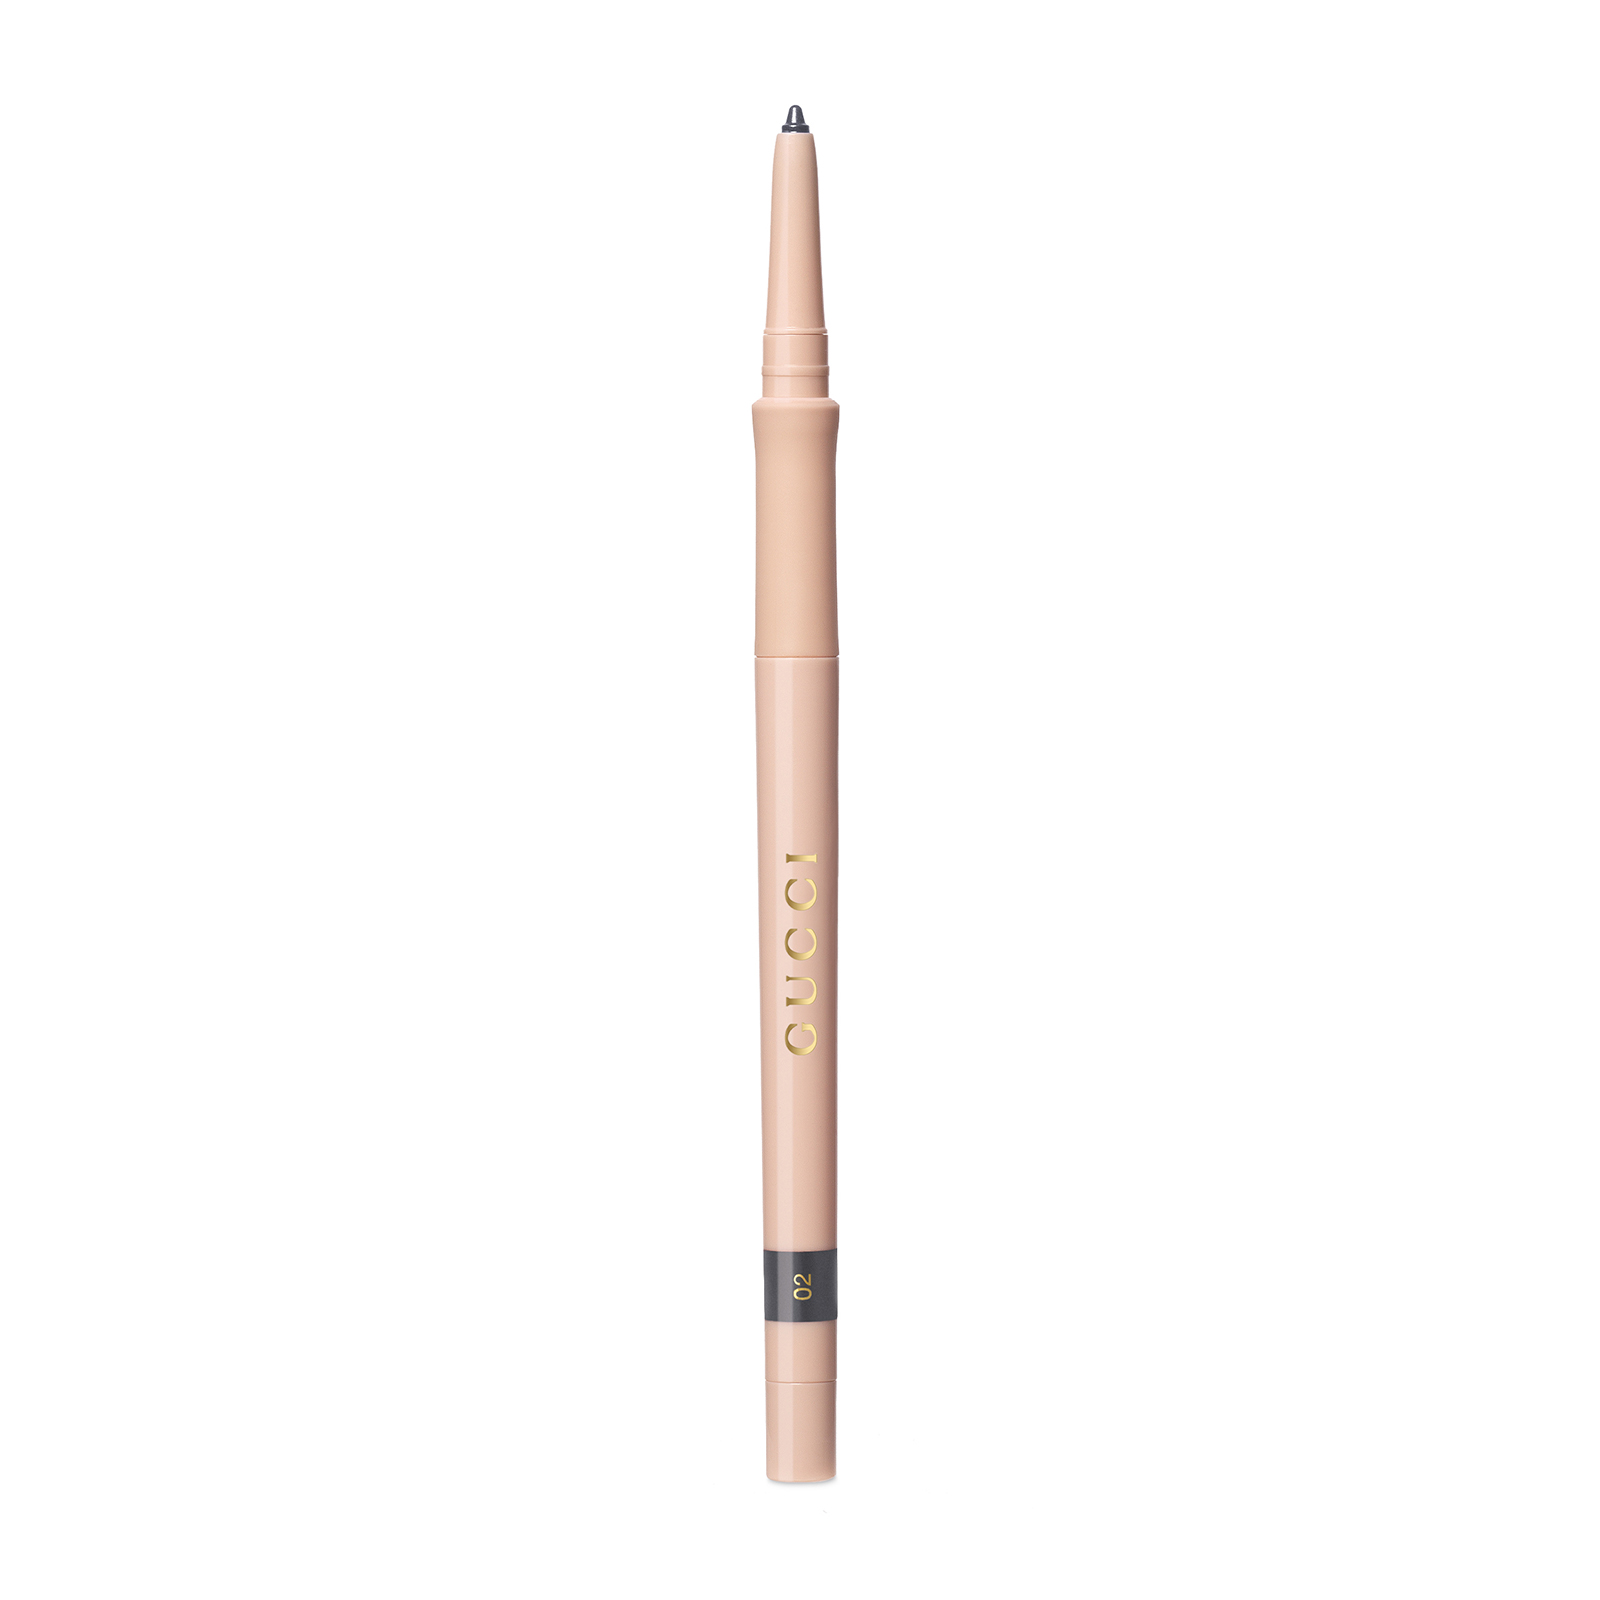 Gucci Stylo Contour Des Yeux Eyeliner 0.34G 02 Anthracite